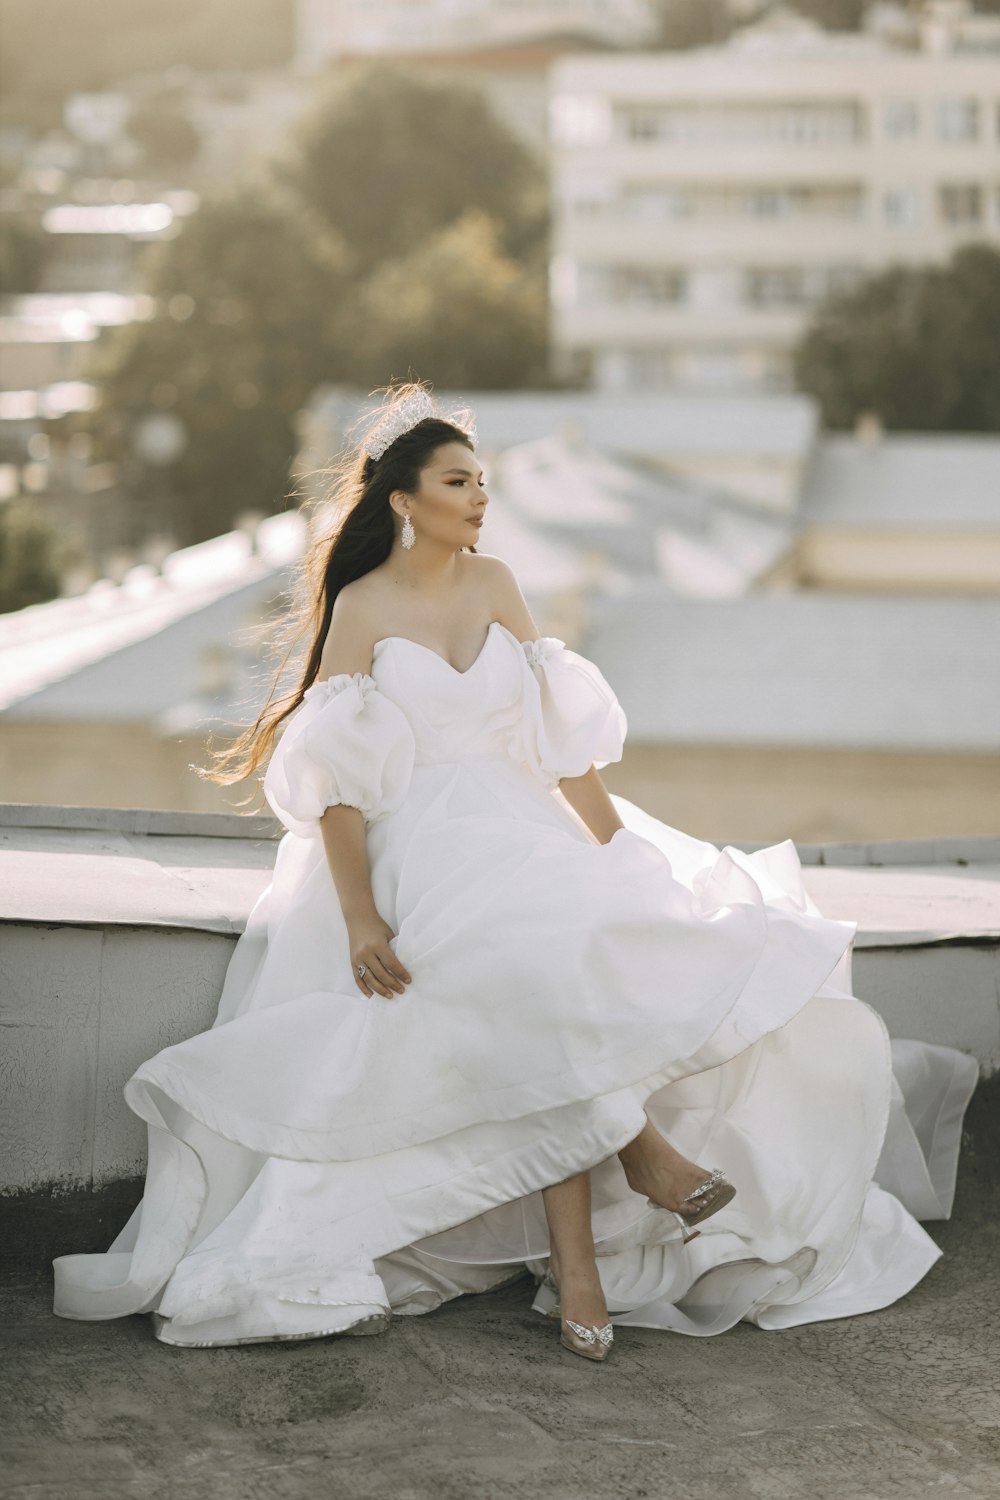 a woman in a white dress sitting on a ledge